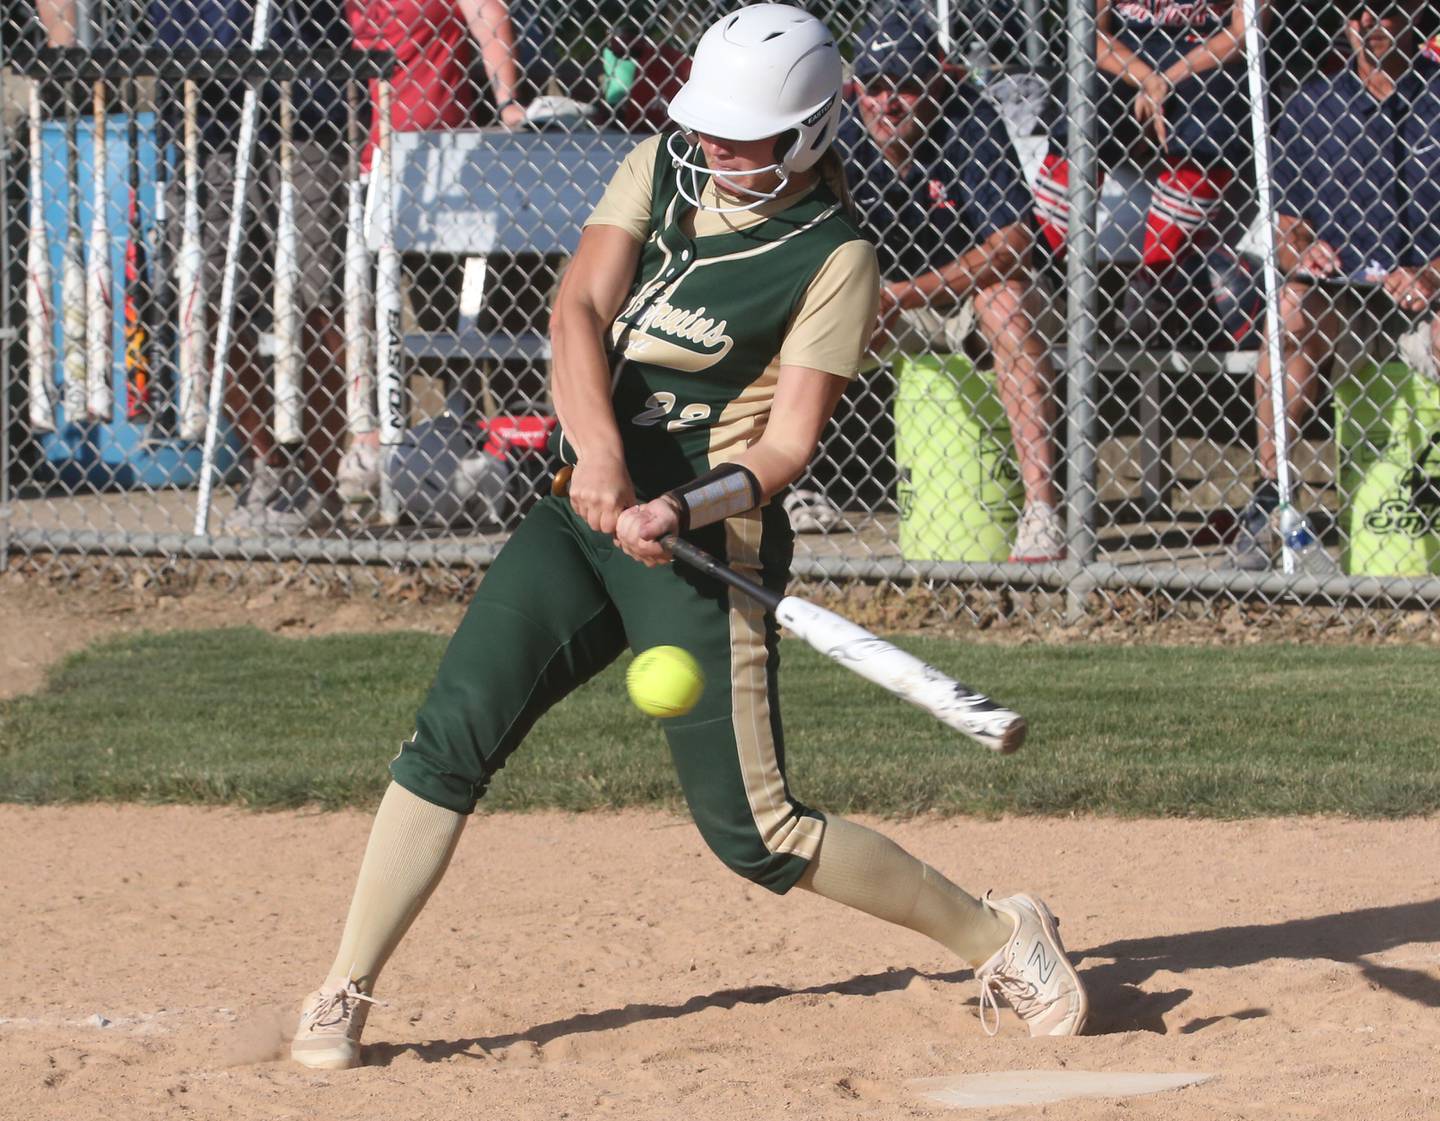 St. Bede's Ella Hermes smacks a three-run home run in the Class 3A Sectional championship game on Friday, May 26, 2023 at St. Bede Academy.